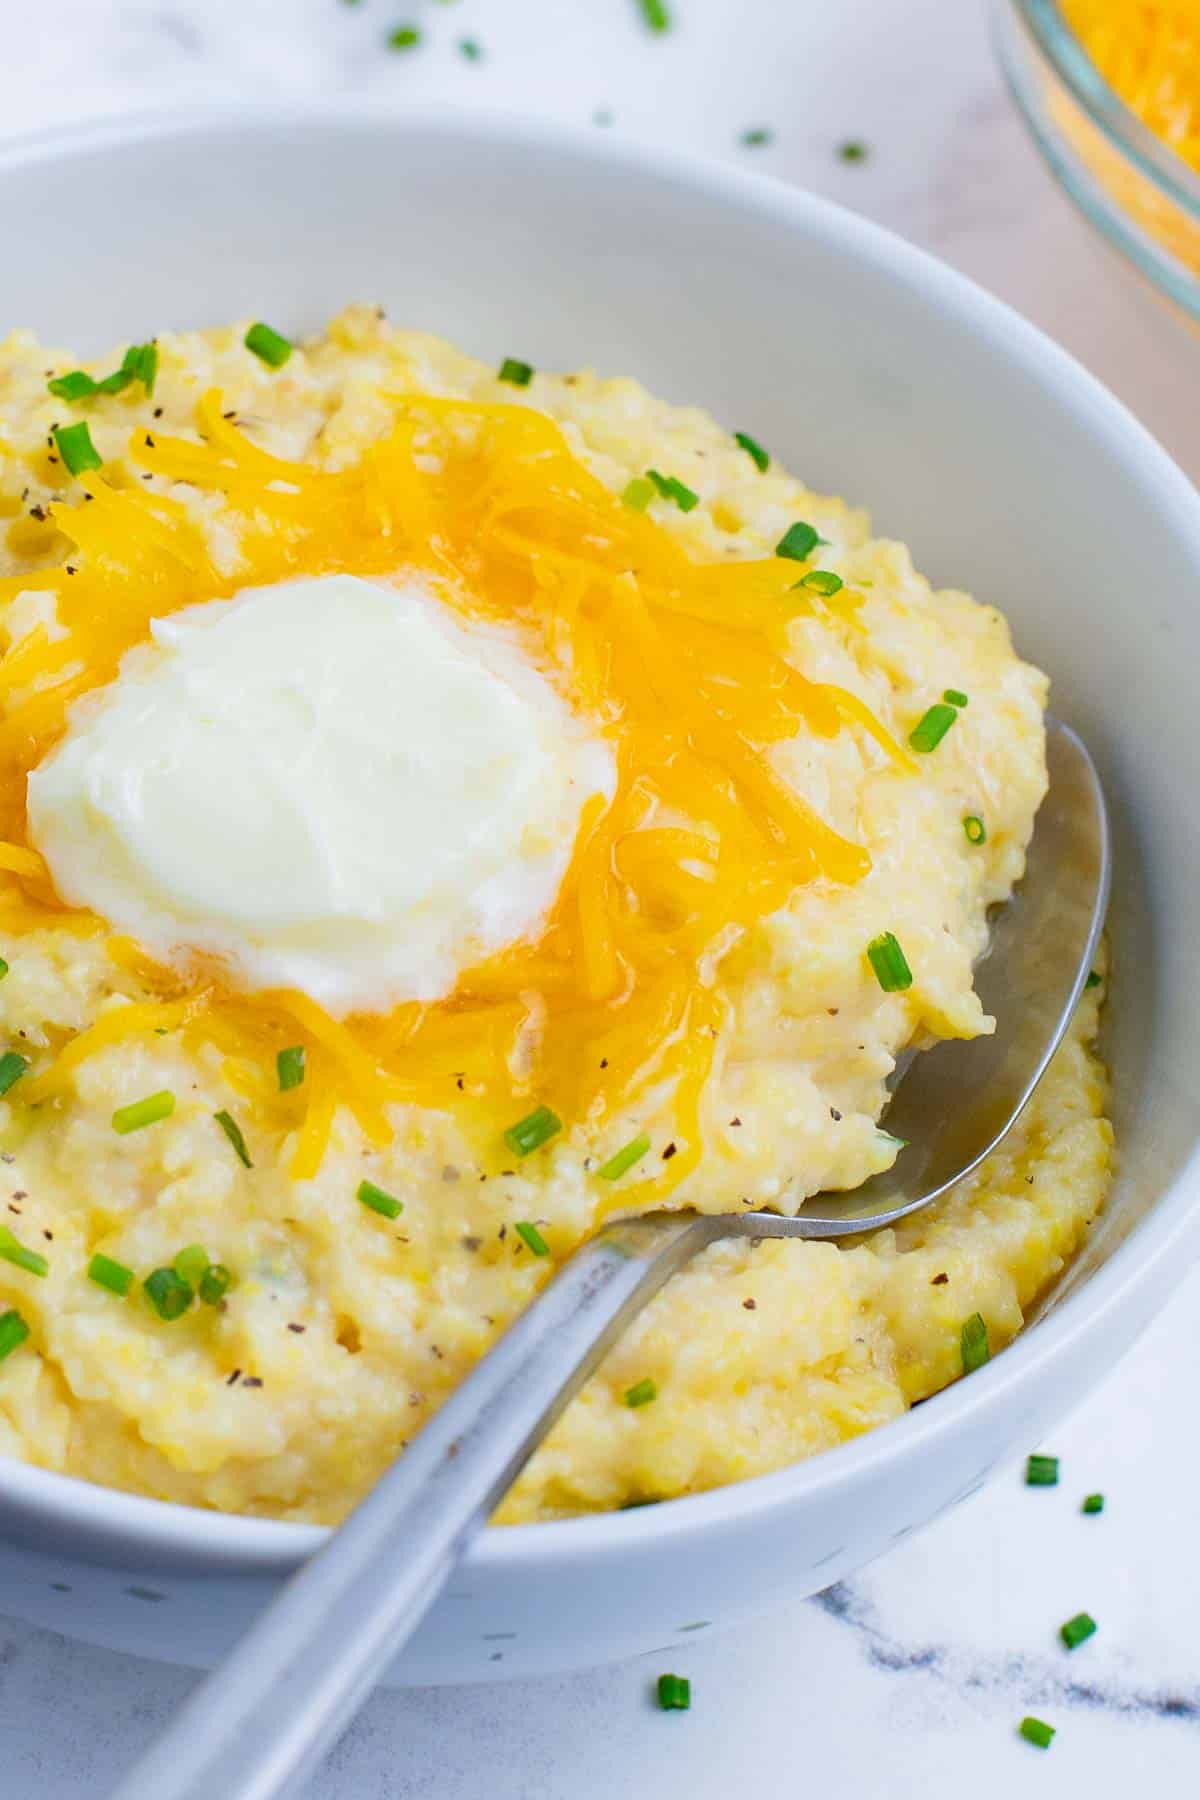 A spoon scoops out a serving of cheese grits.